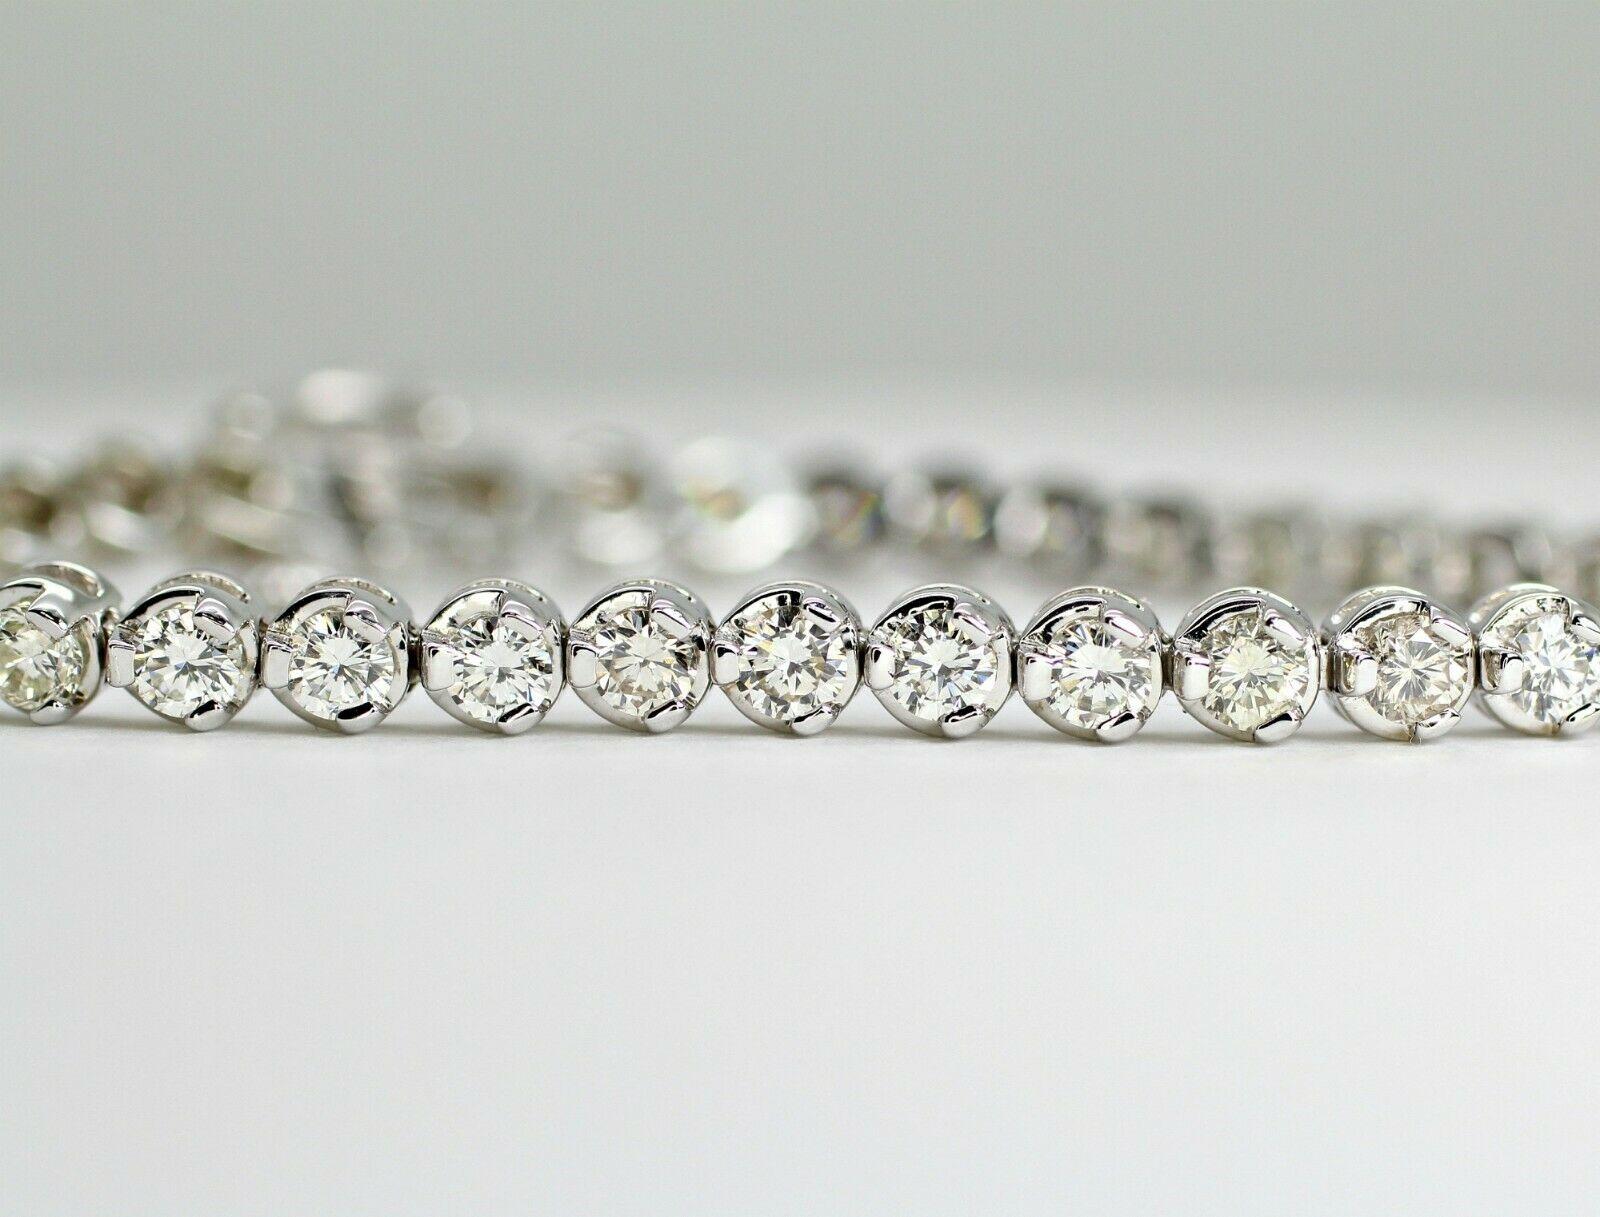 This is a 14k white gold diamond tennis bracelet with approximately 5.32 carat total weight of round diamonds. The diamonds range from H-J color, VS2-Si1 clarity. The round diamonds are brilliant and clean with no visible inclusions. It is not too